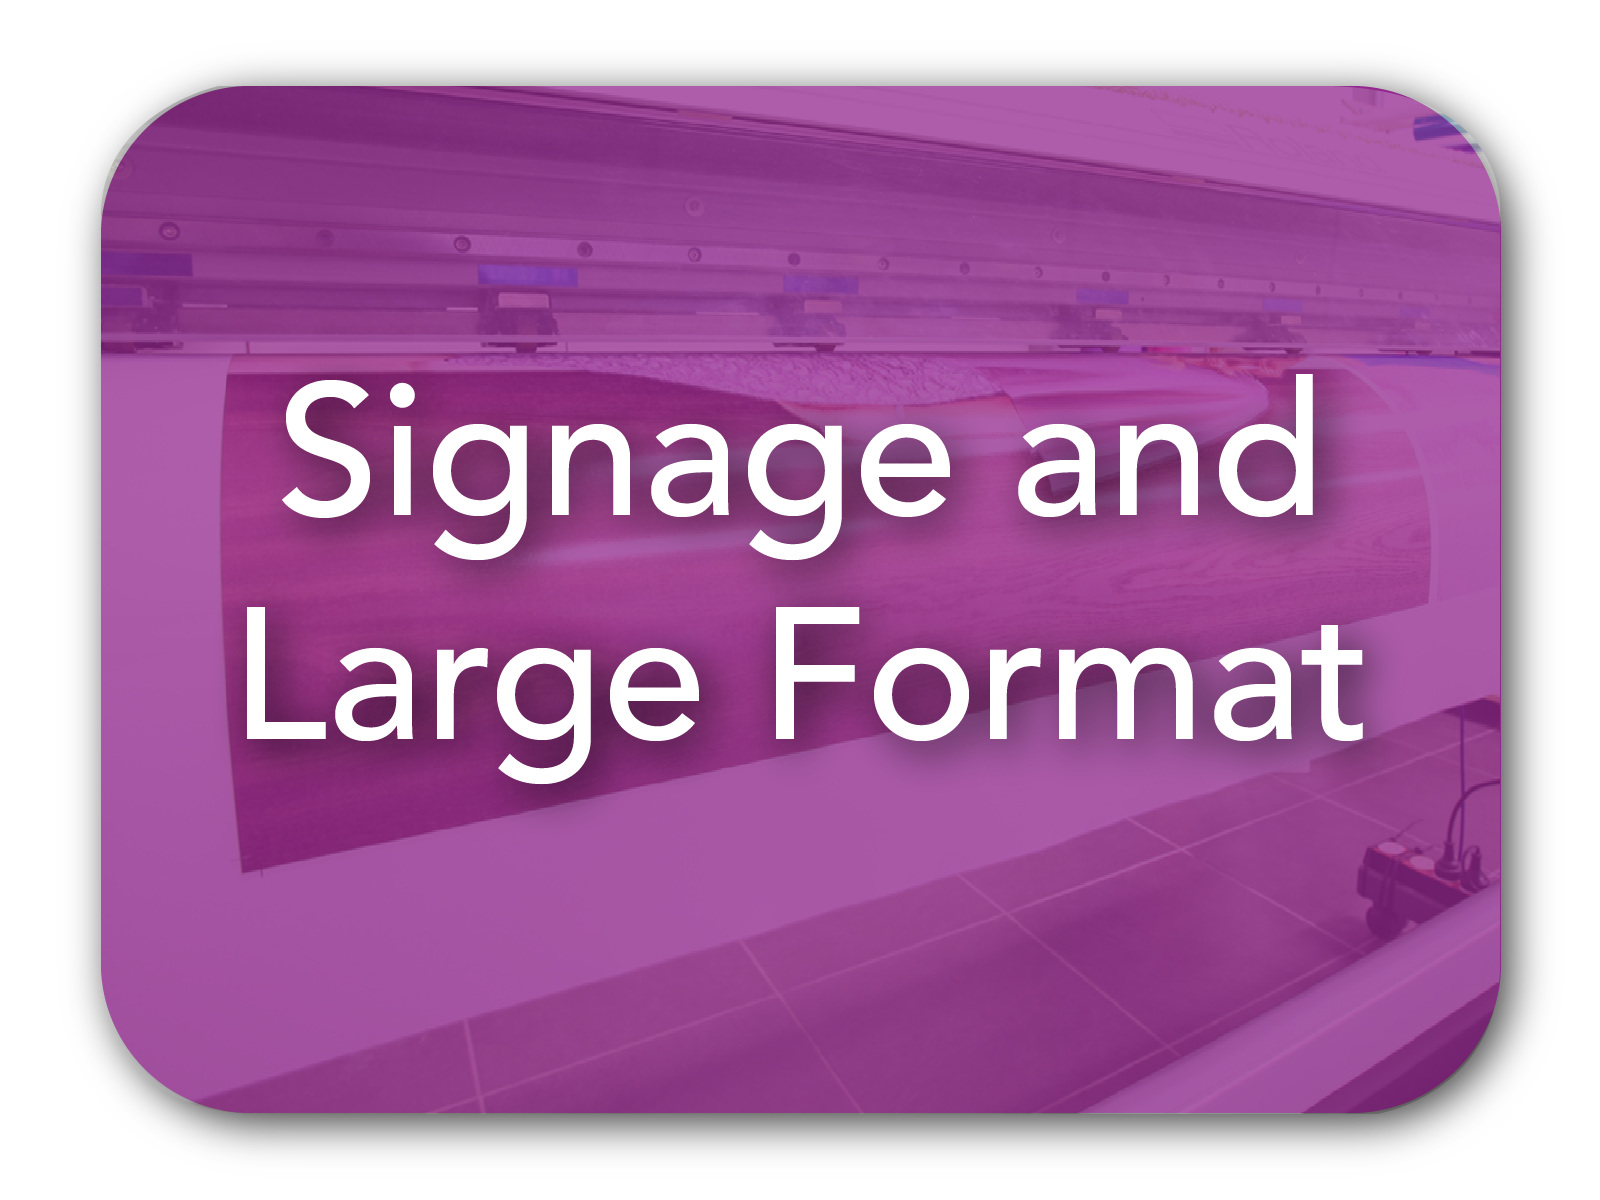 Signage and Large Format